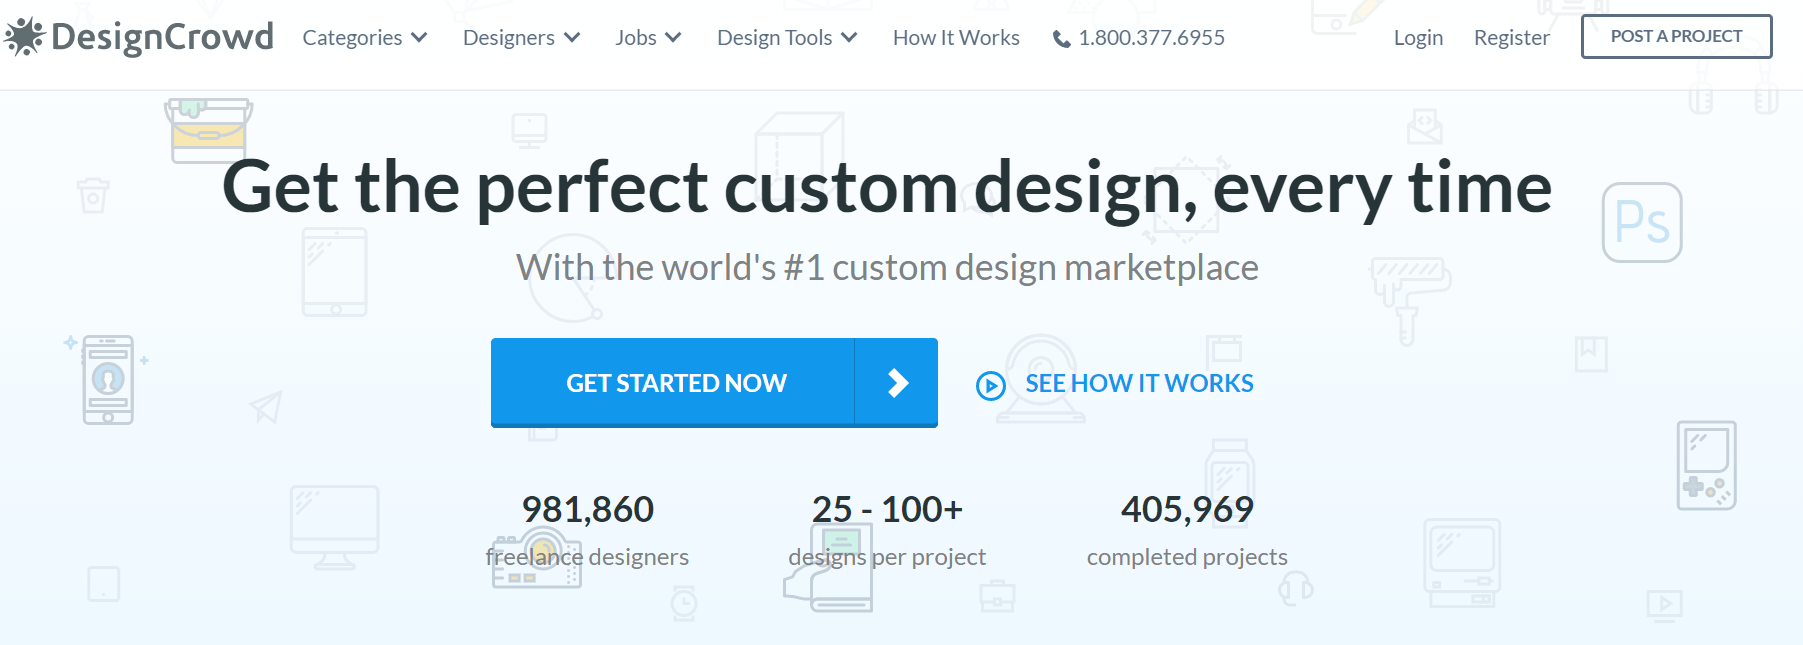 designcrowd review